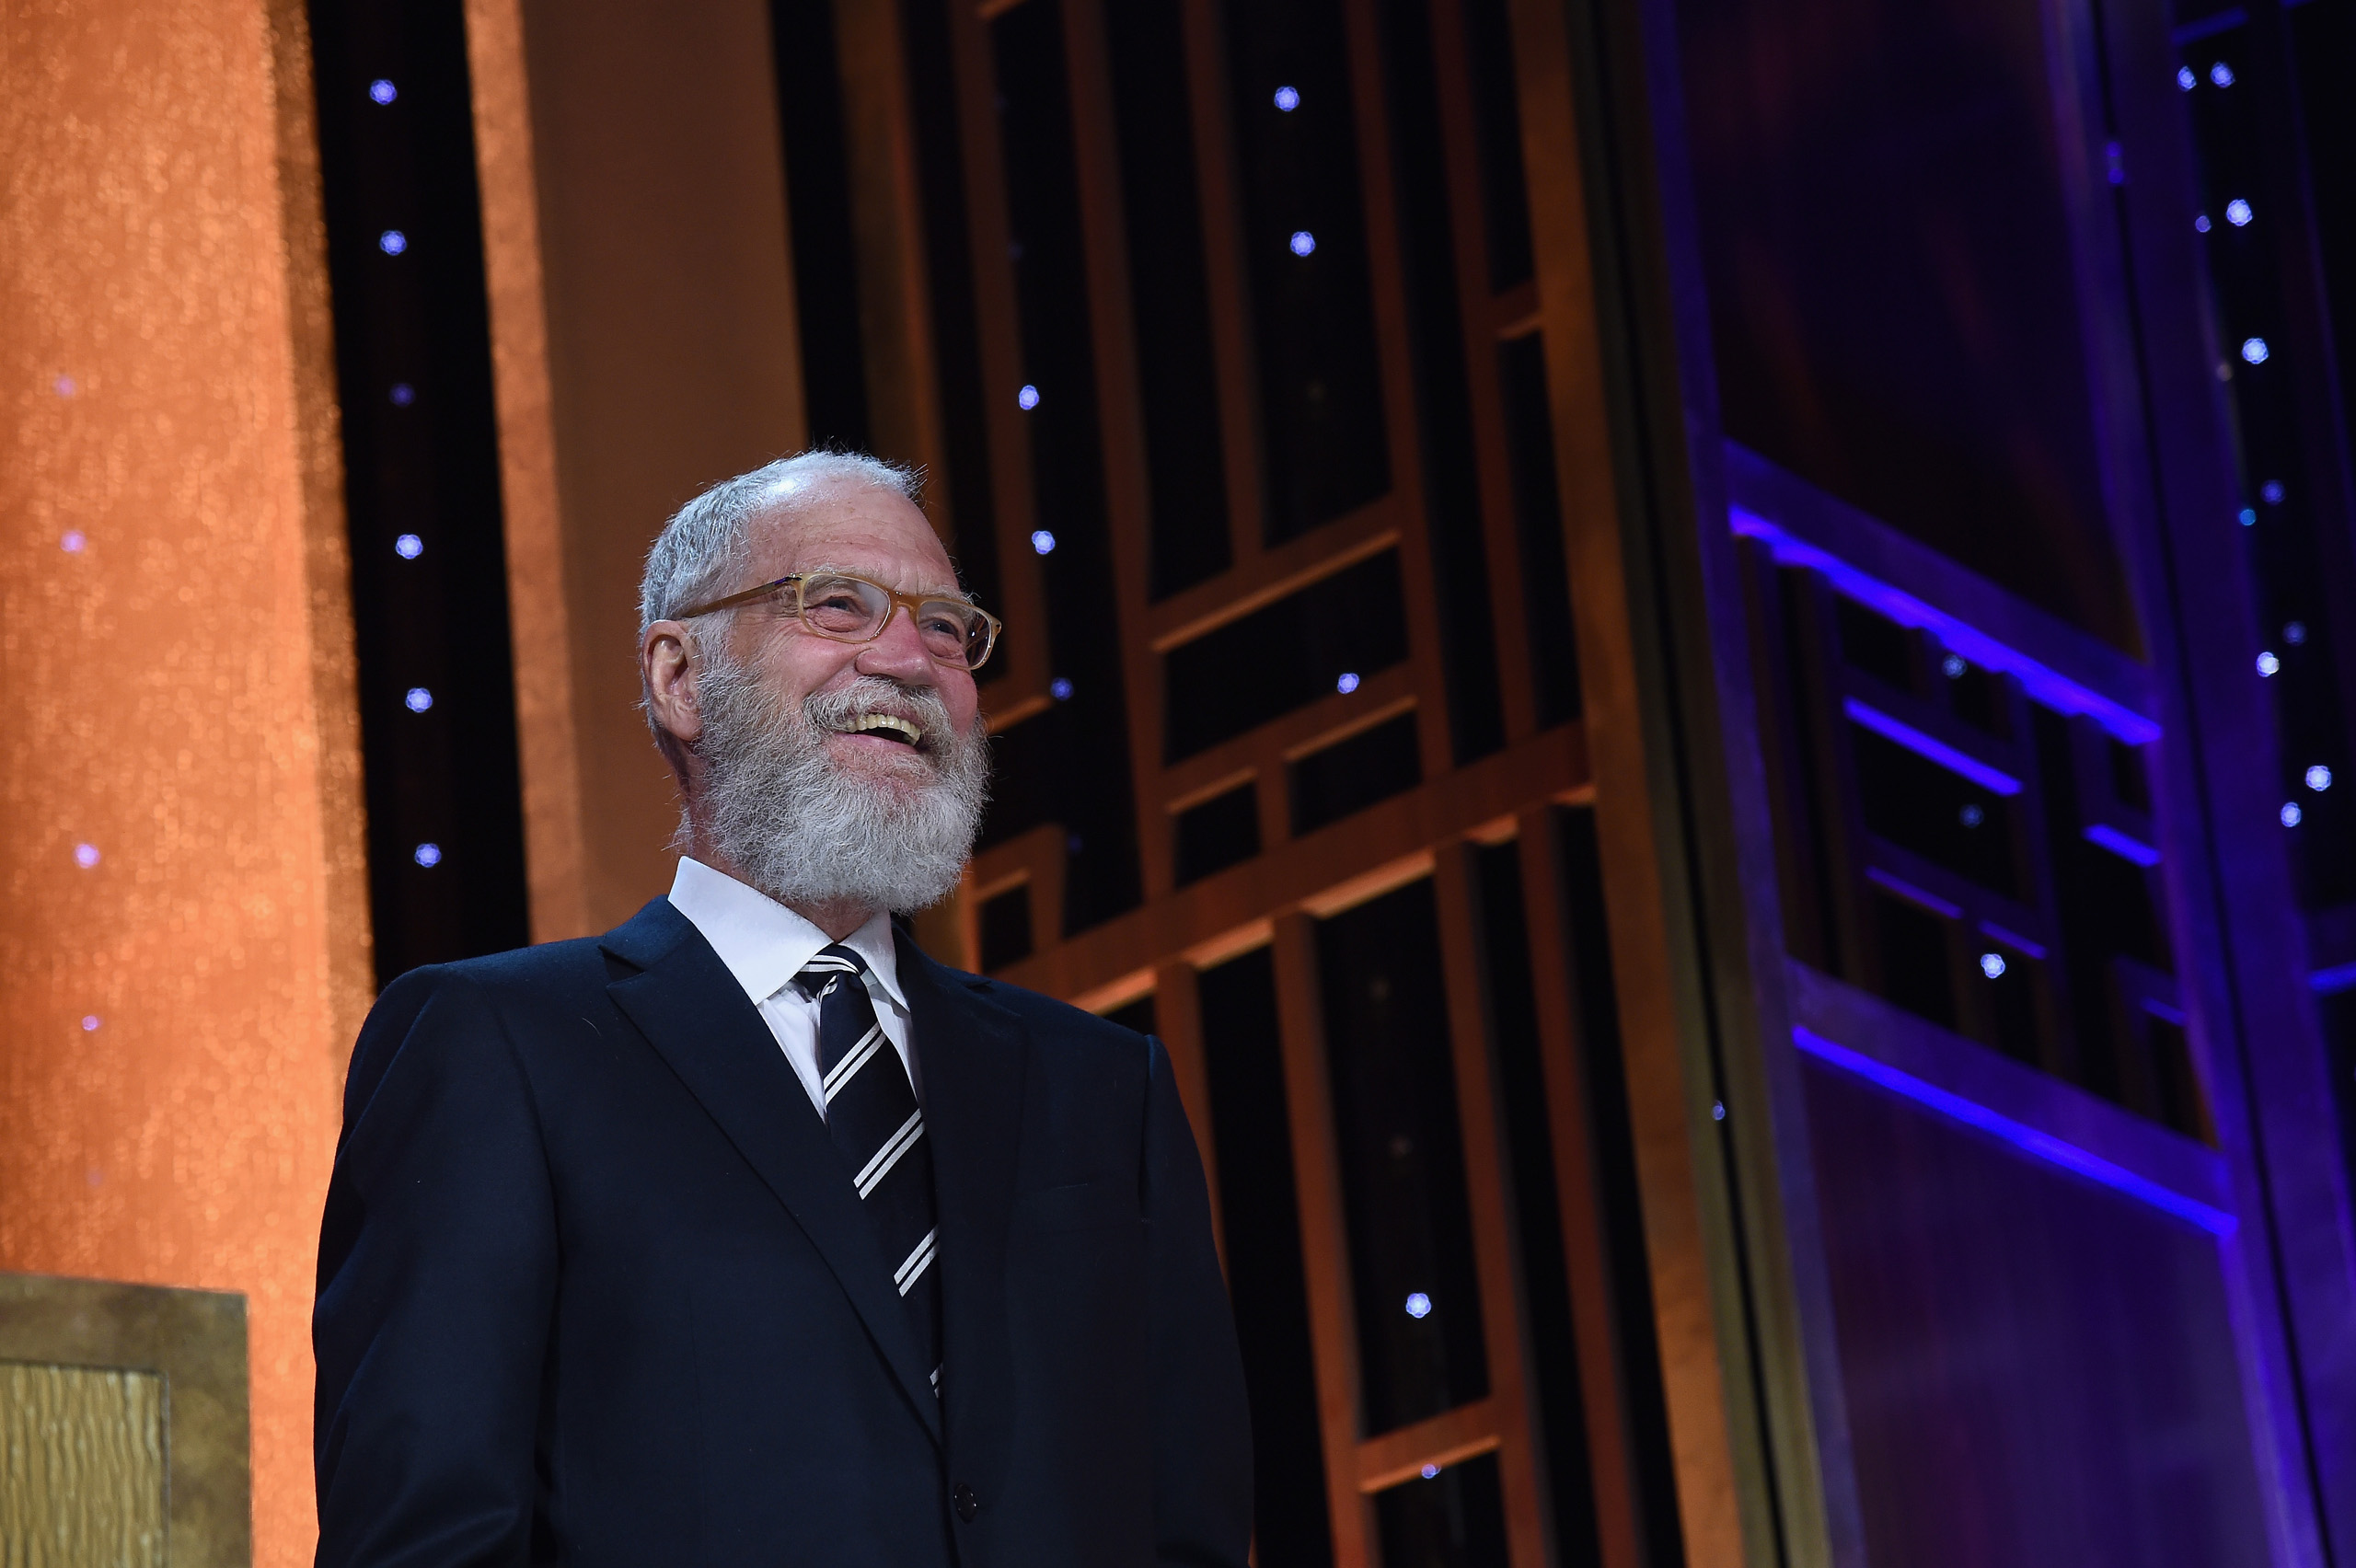 David Letterman speaks onstage at The 75th Annual Peabody Awards Ceremony at Cipriani Wall Street in New York City on May 21, 2016. (Ilya S. Savenok—Getty Images for Peabody)